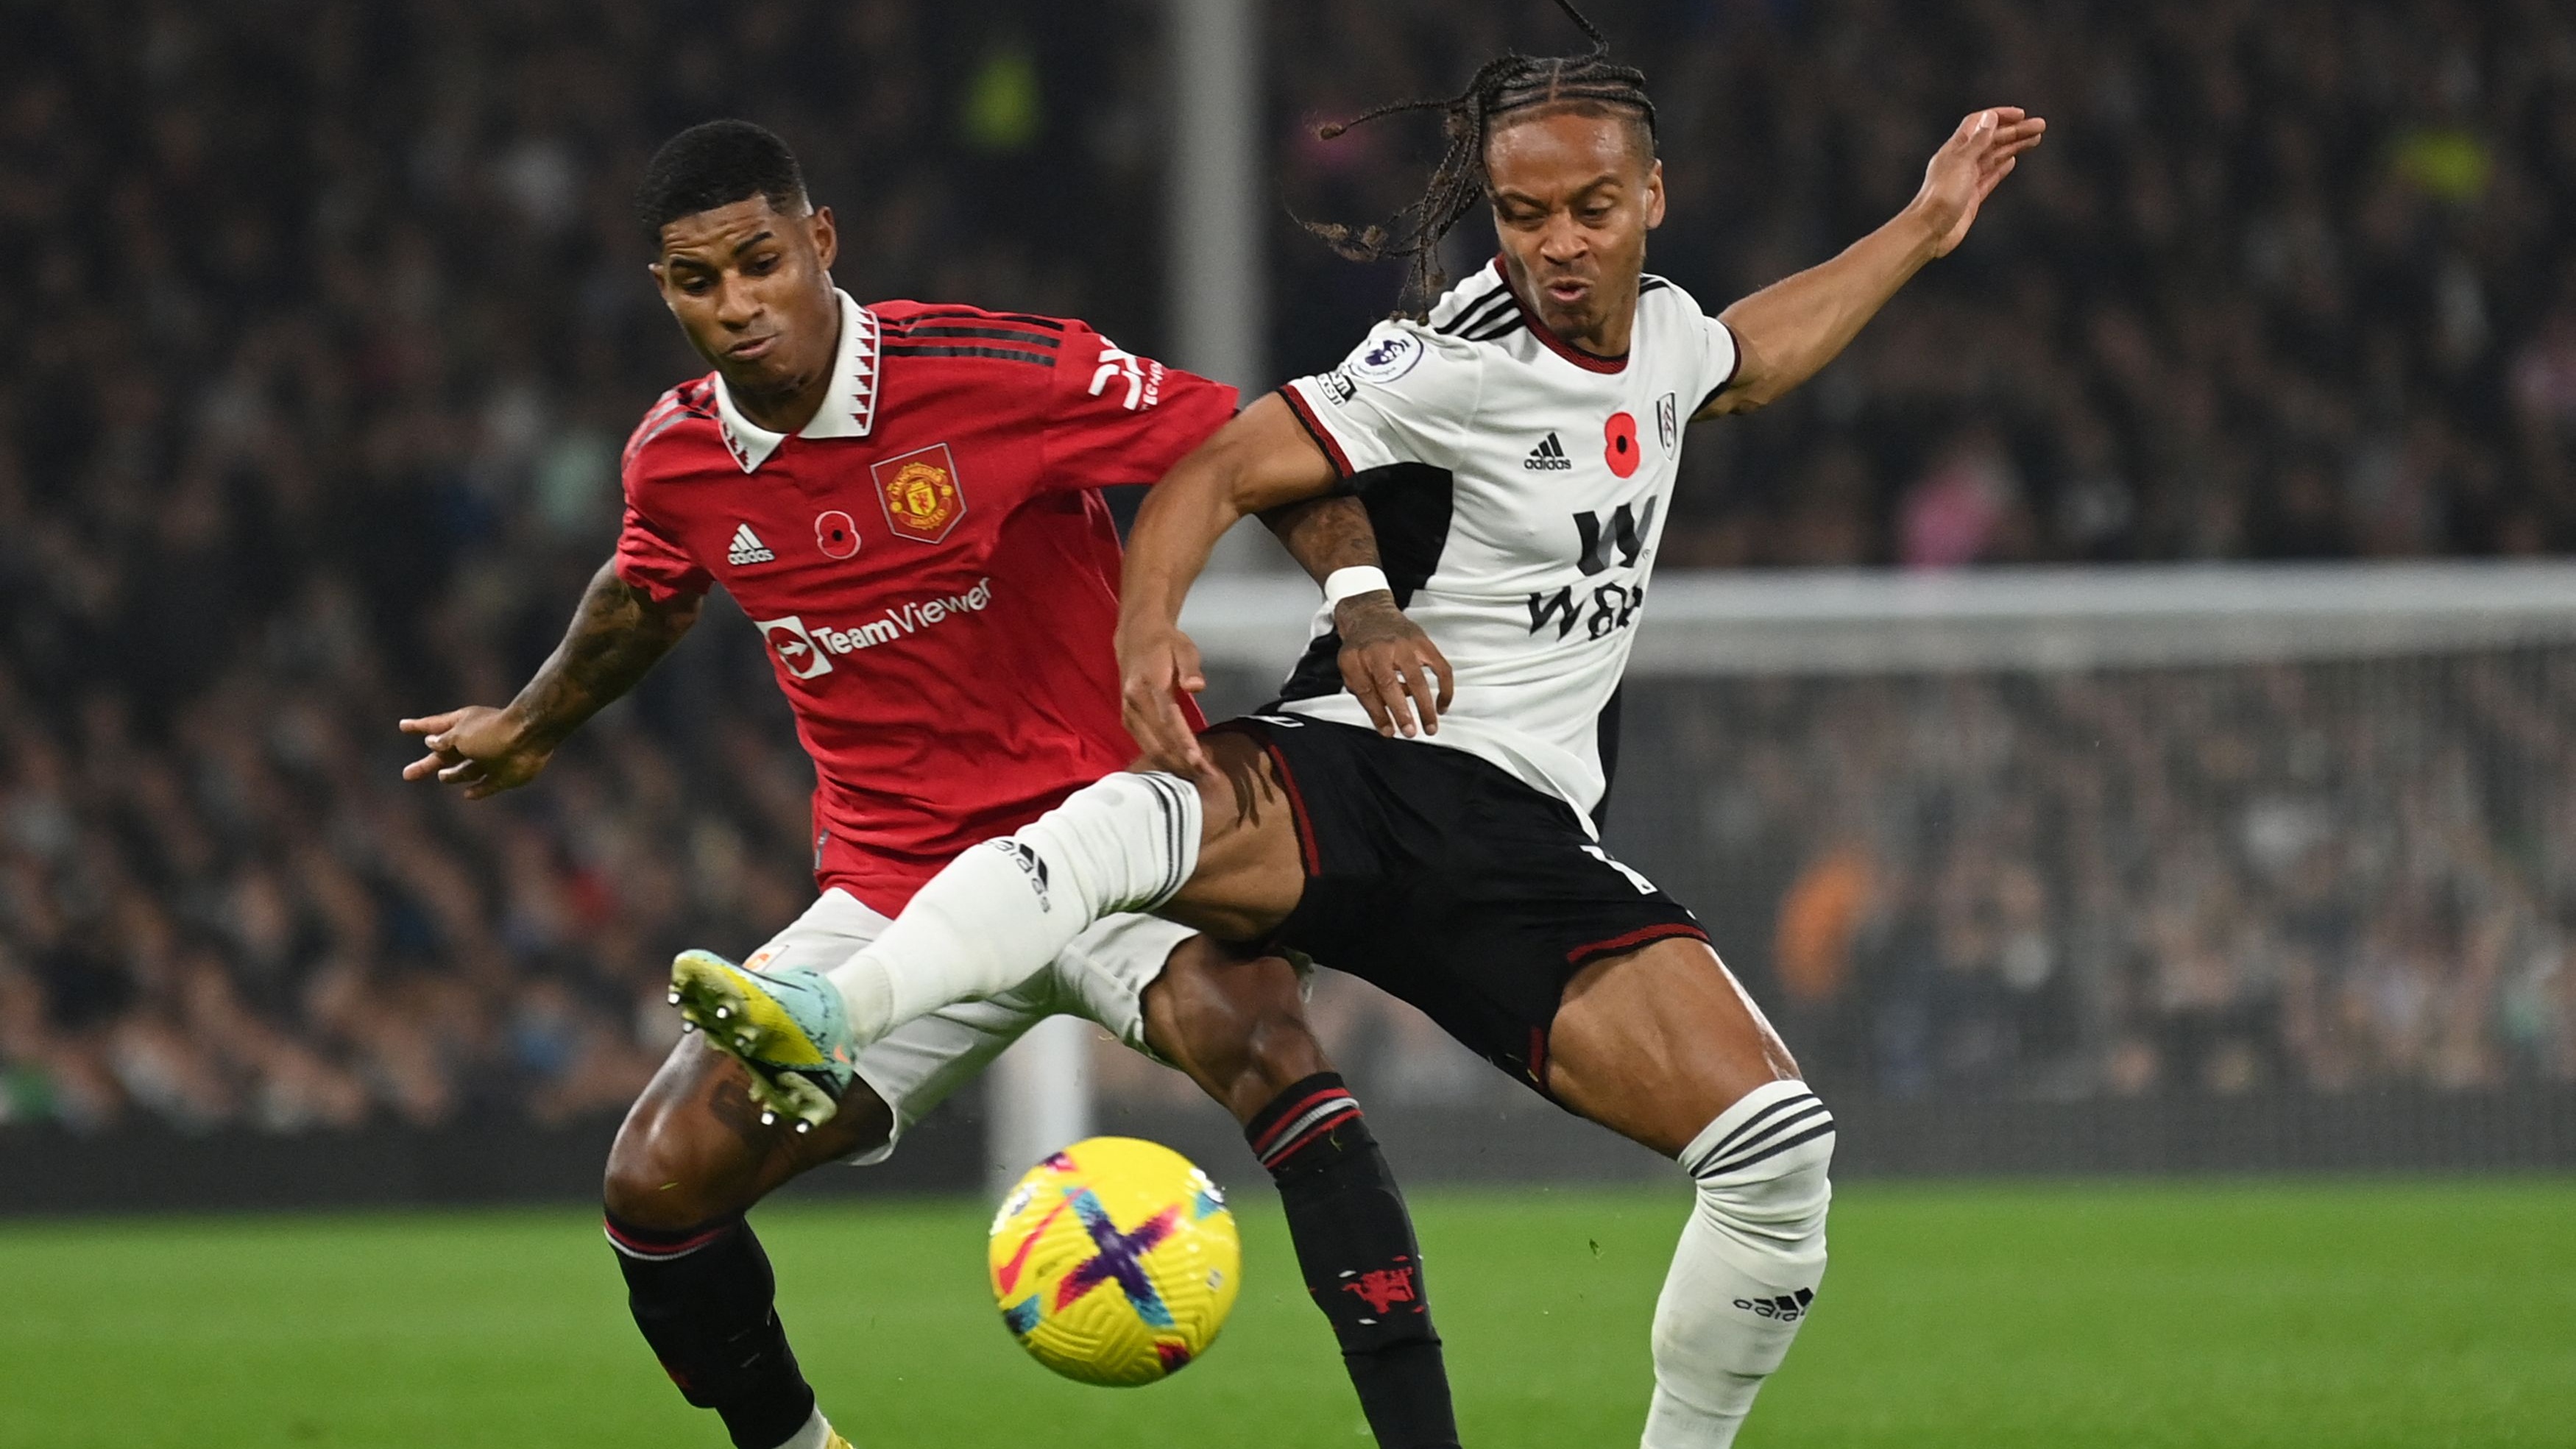 Manchester United vs Fulham live stream how to watch FA Cup quarter-final online and on TV TechRadar